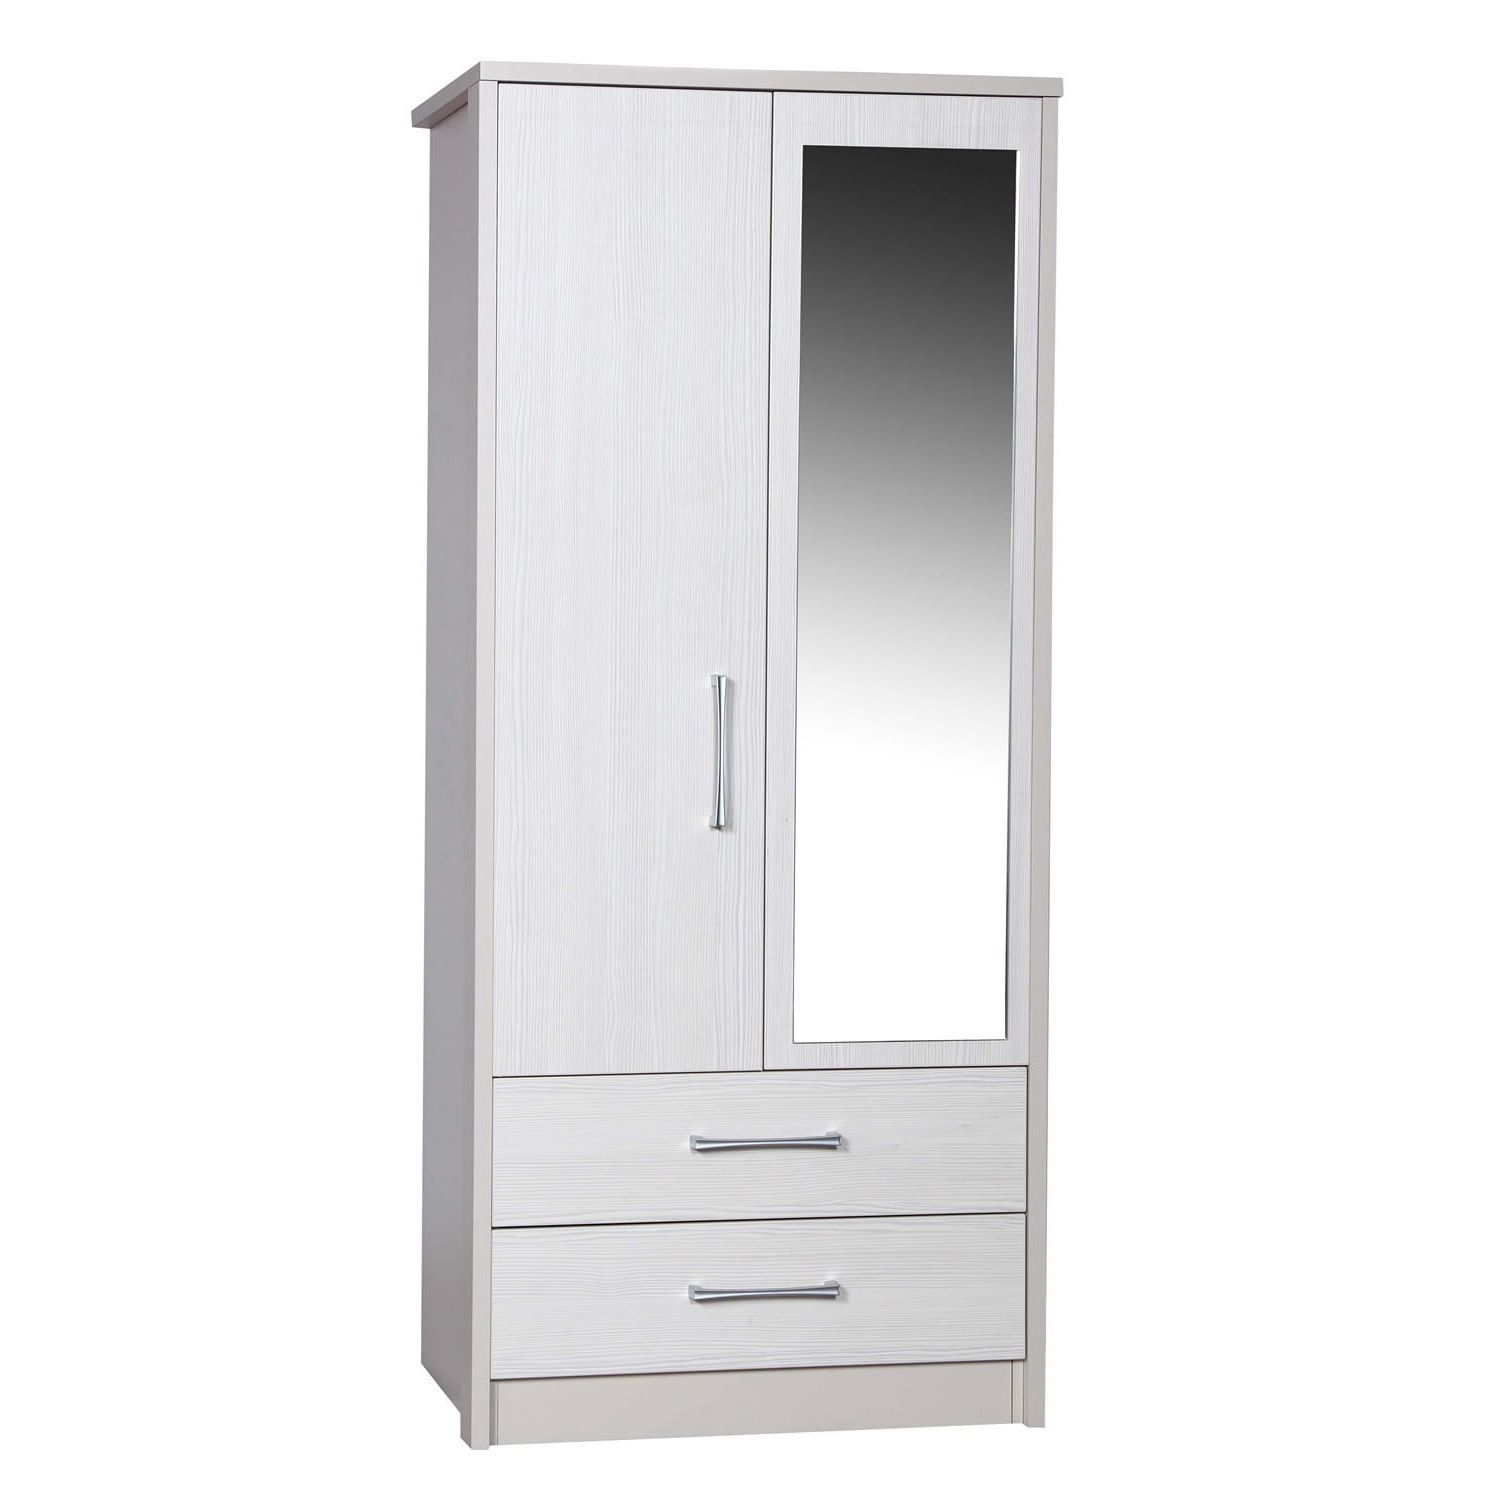 Favorite Cheap White Wardrobe With Drawers 3 Door Childrens And Set This For Large White Wardrobes With Drawers (View 14 of 15)